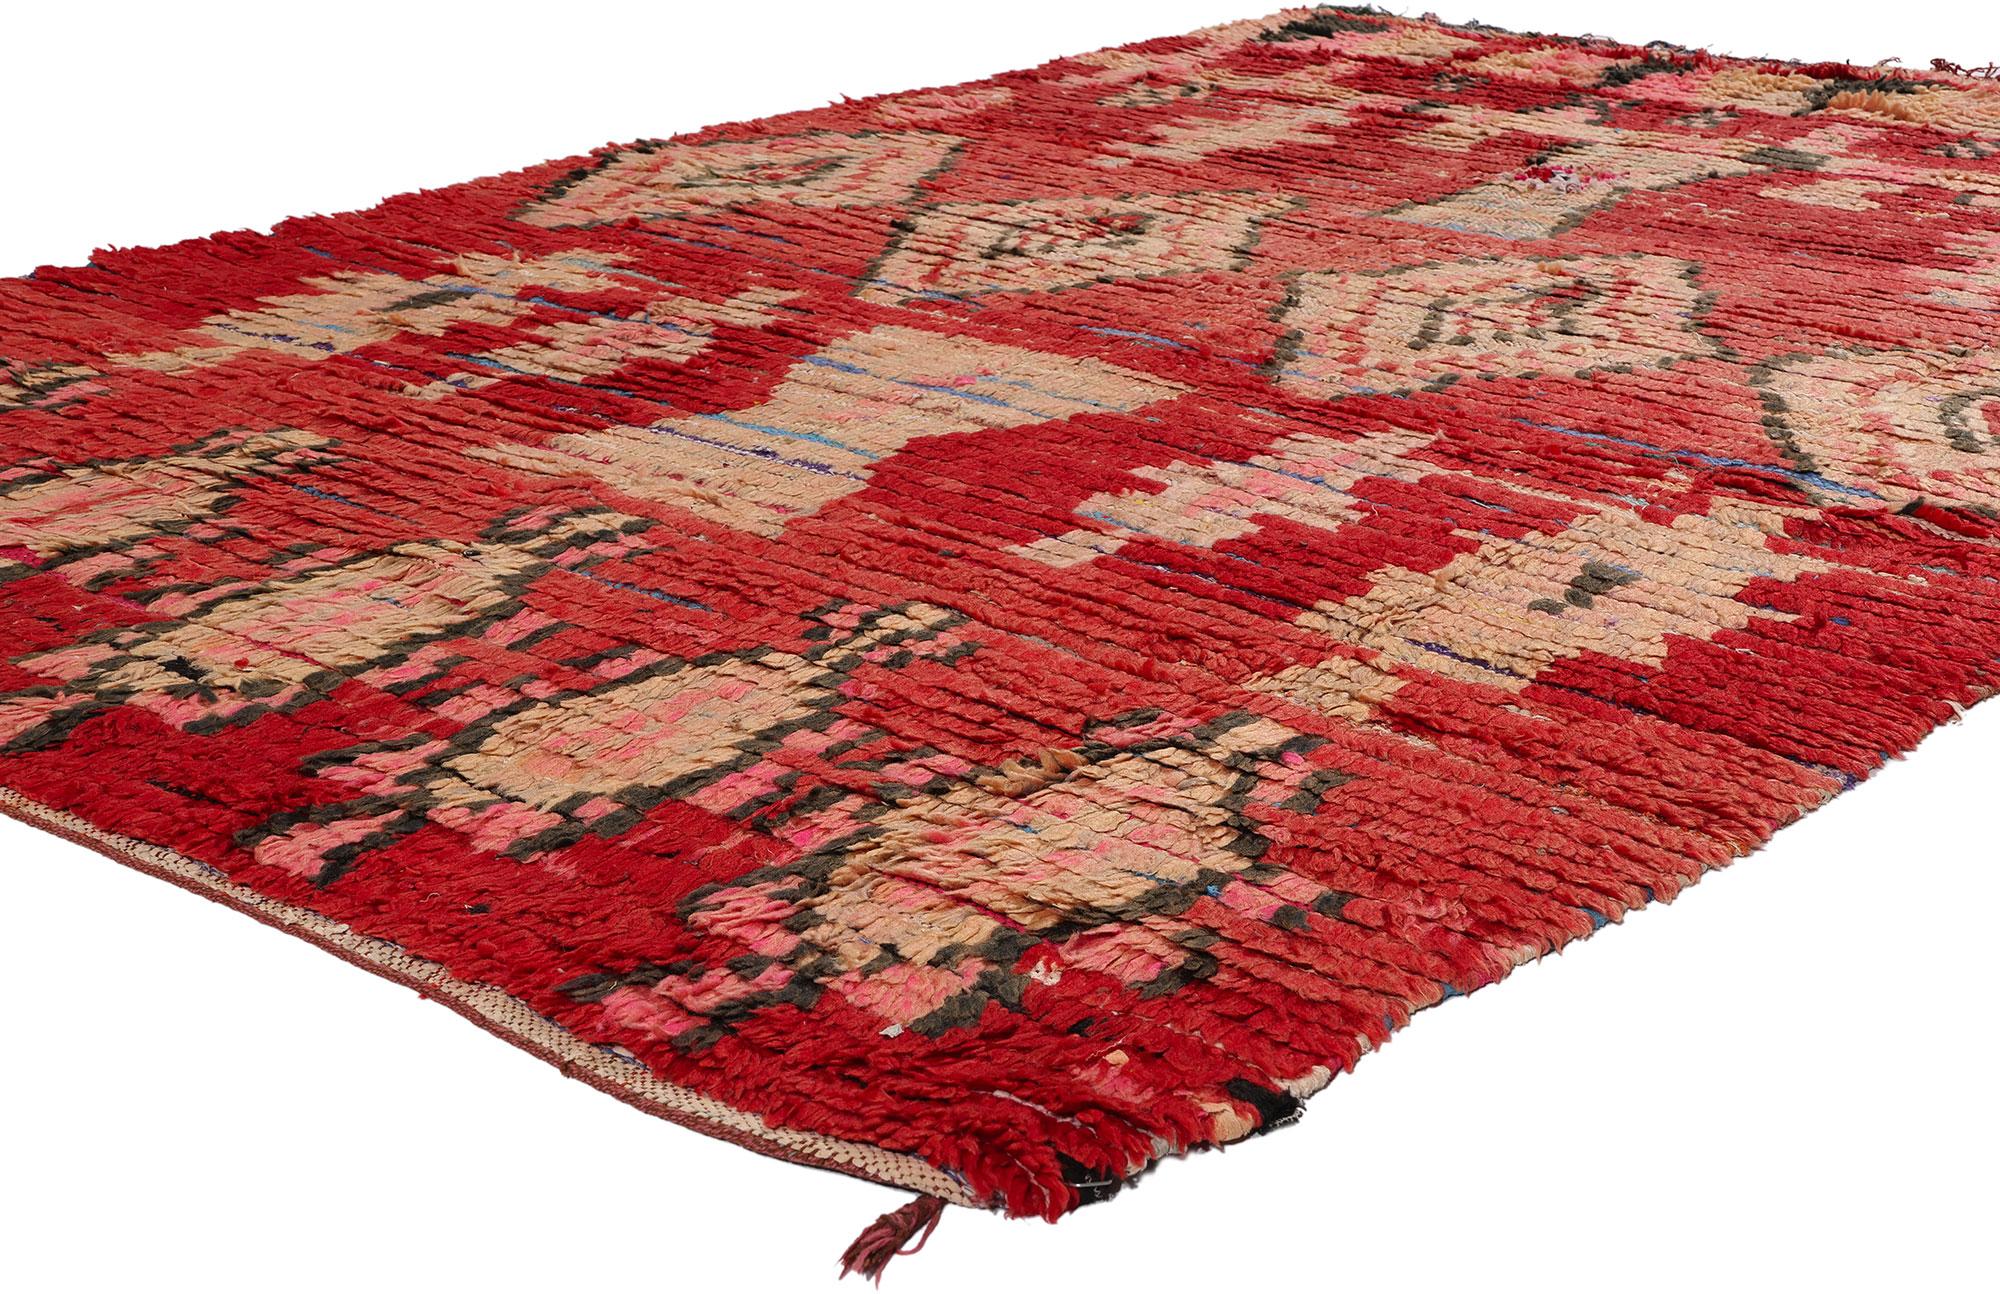 21766 Vintage Red Boujad Boucherouite Moroccan Rag Rug, 05'03 x 07'06. The Boujad rag rug, or Boujad Boucherouite rug, unfolds a mesmerizing tale of tribal enchantment and sustainable craftsmanship, emerging from the Boujad region in the Khouribga